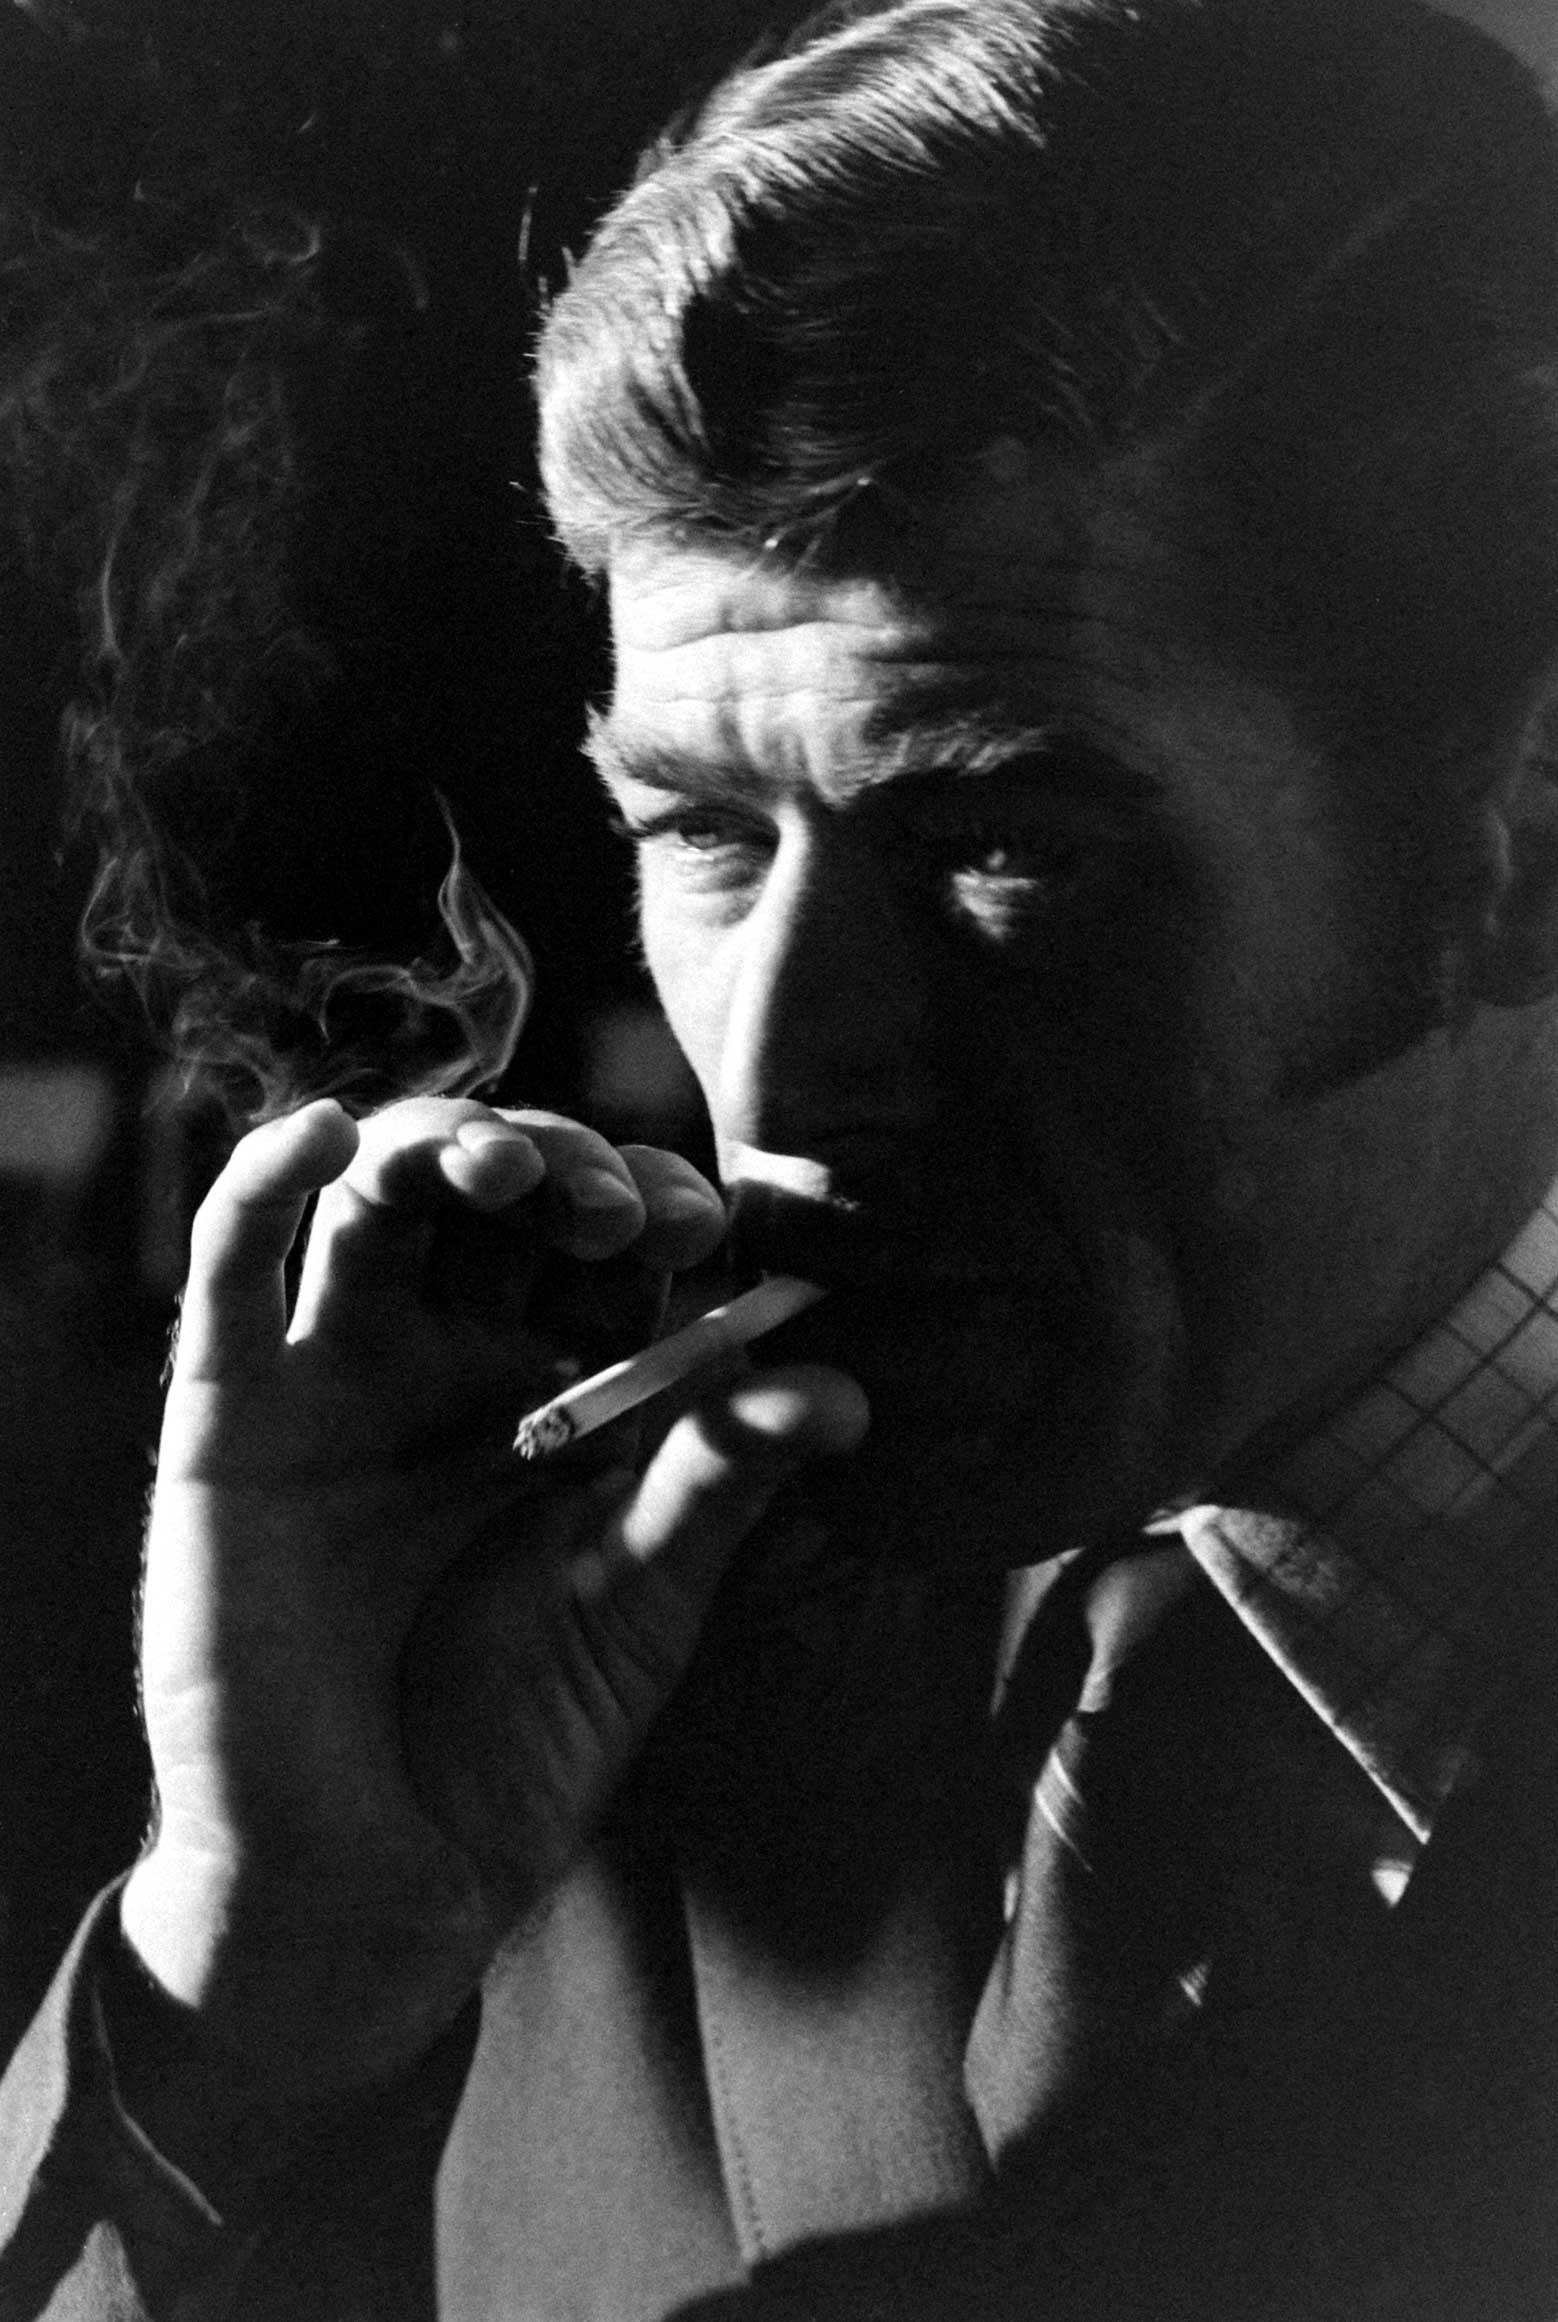 Anthony Rogers smokes a cigarette during his James Bond audition, 1967.